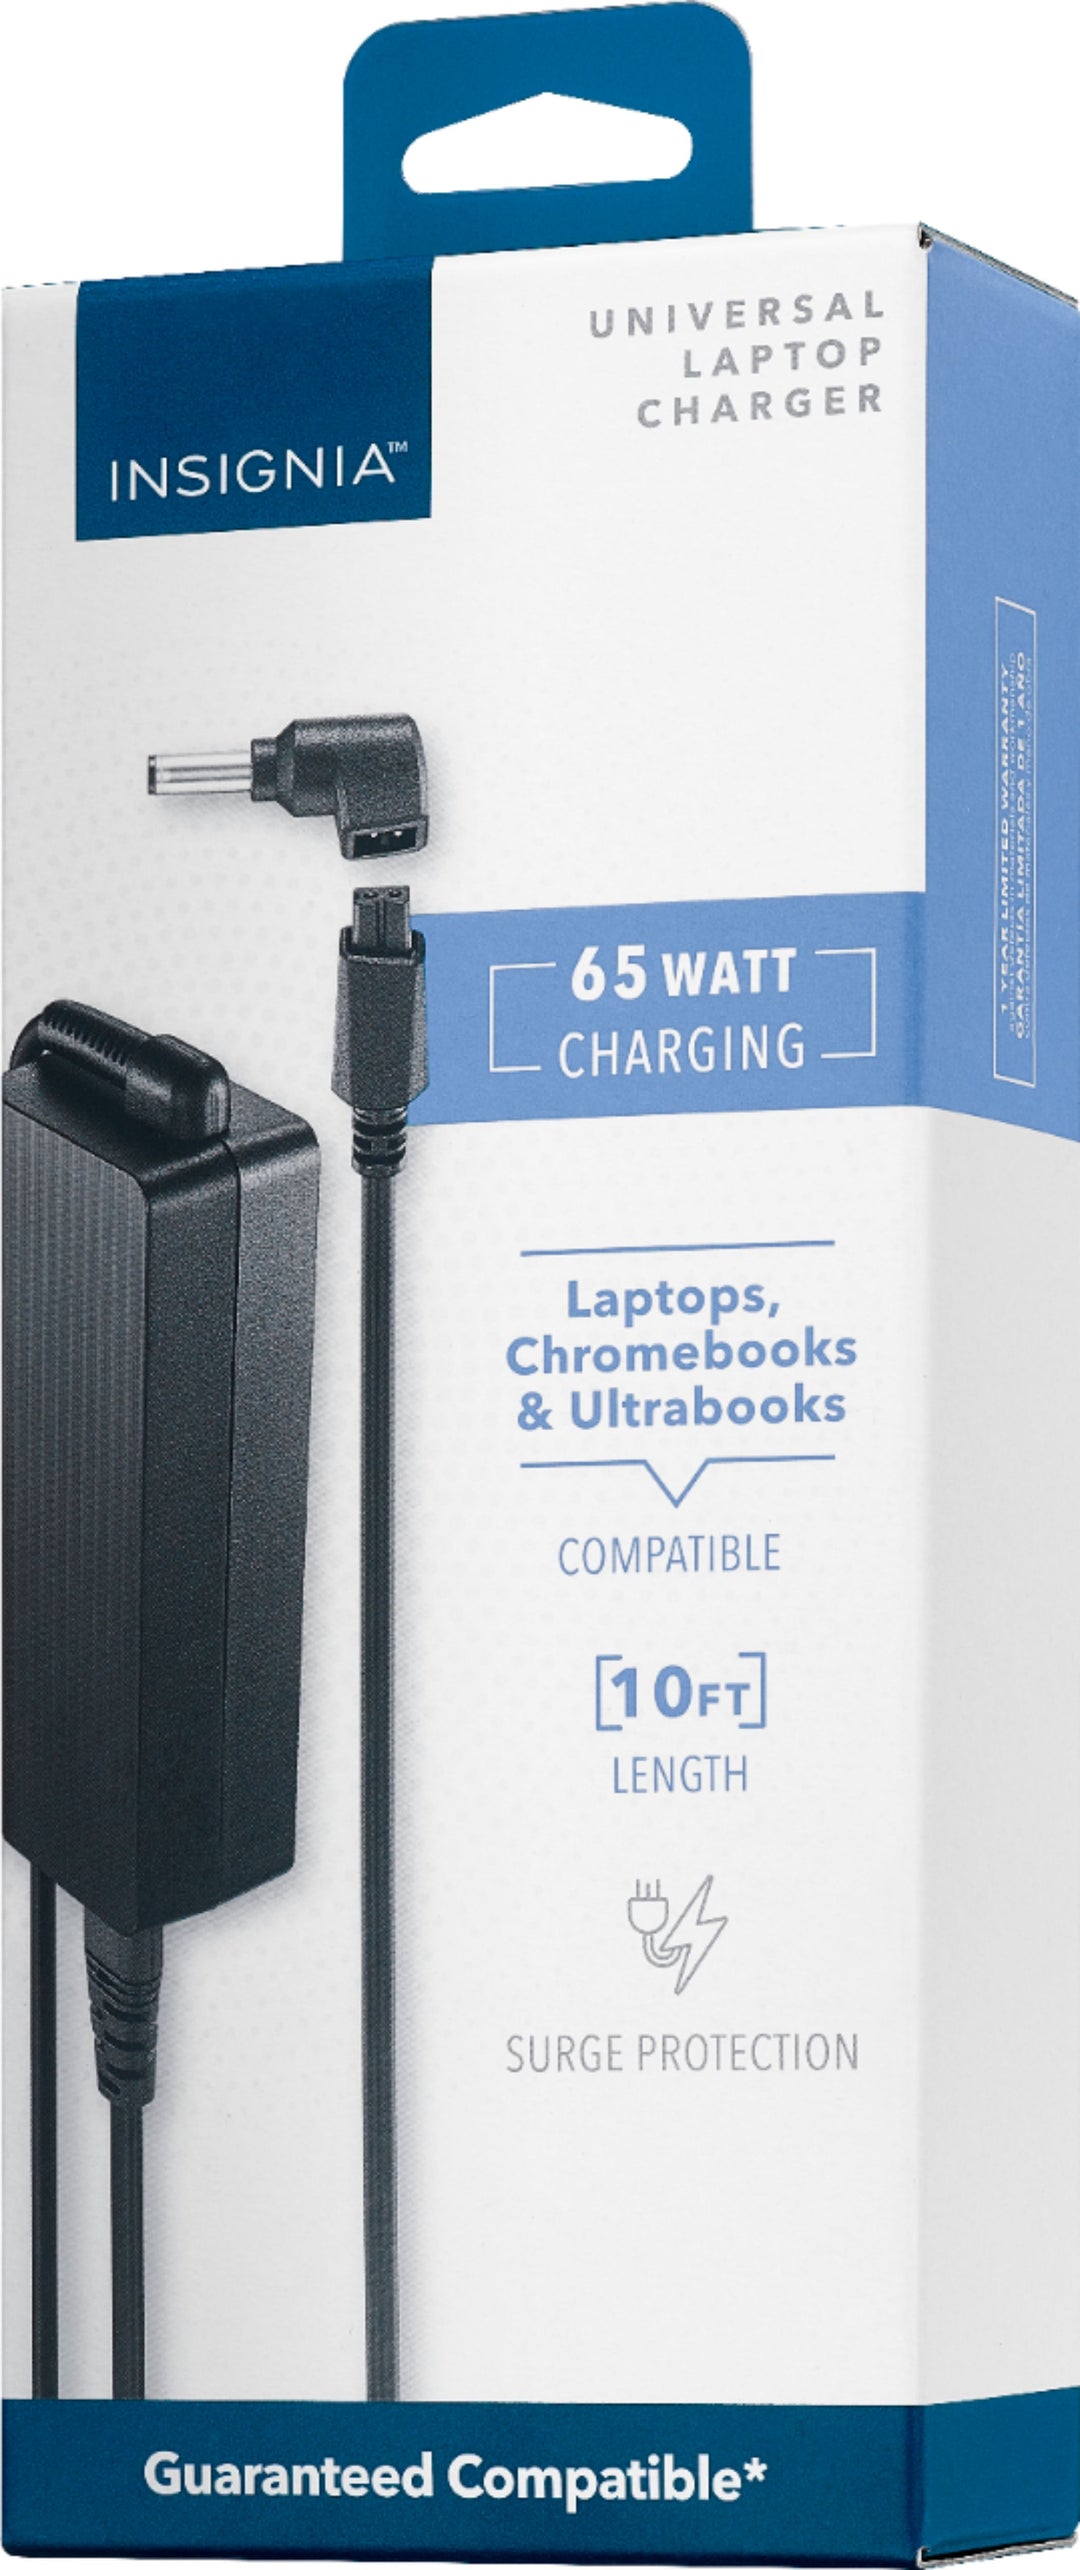 Insignia™ - Universal 65W Laptop Charger - Black_2